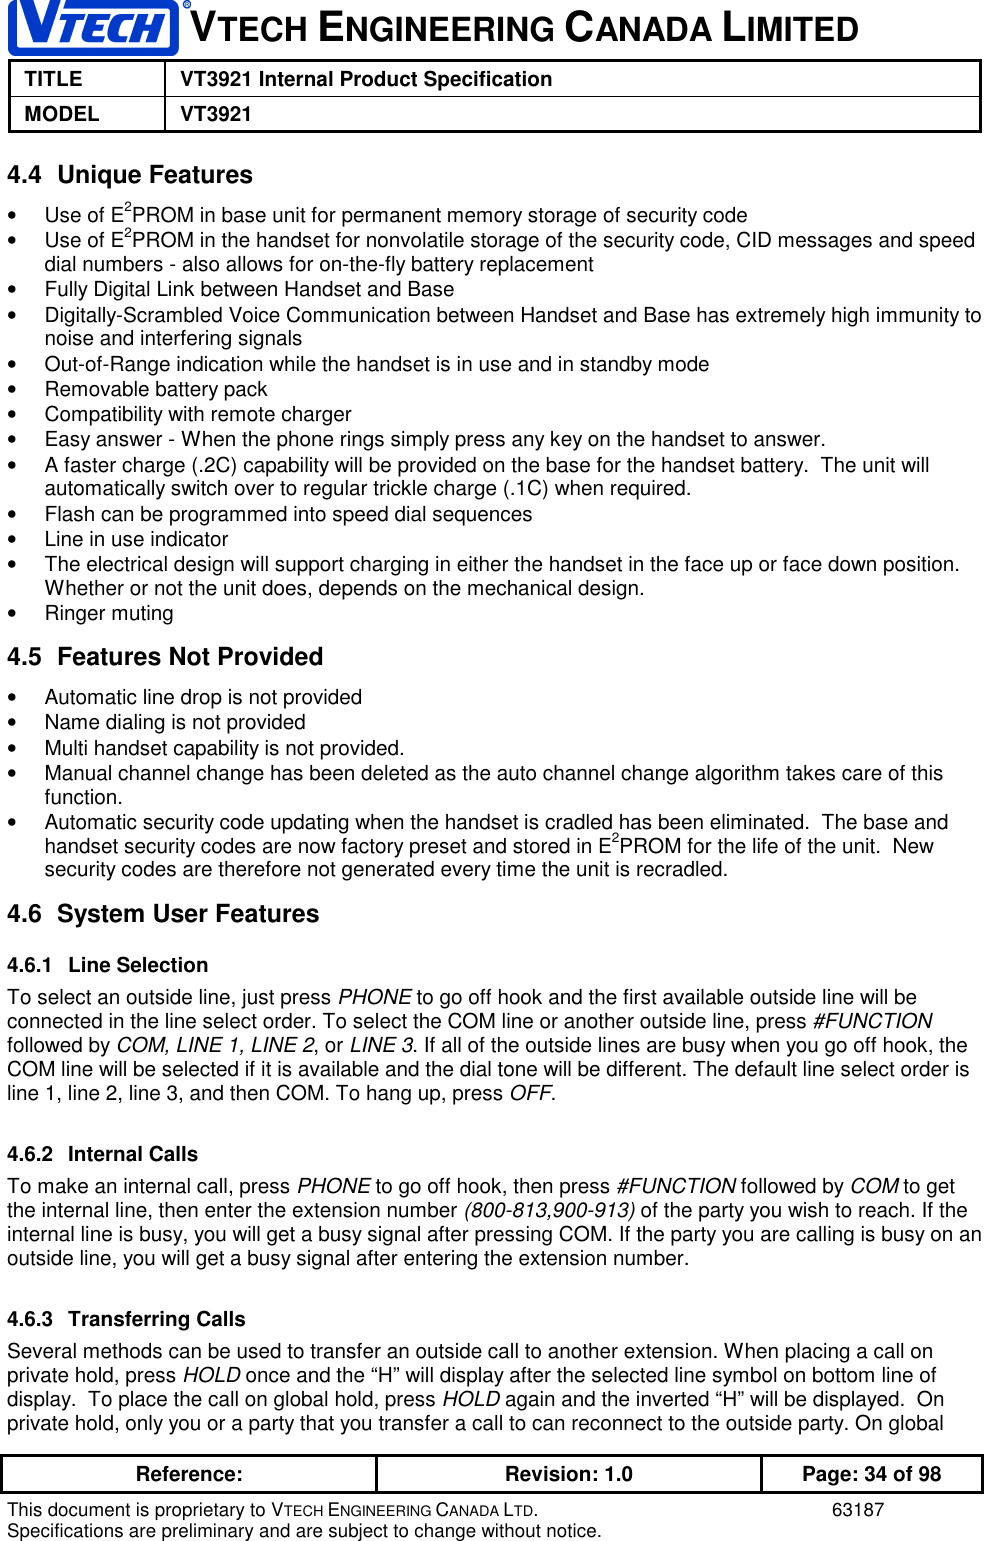 VTECH ENGINEERING CANADA LIMITEDTITLE VT3921 Internal Product SpecificationMODEL VT3921Reference: Revision: 1.0 Page: 34 of 98This document is proprietary to VTECH ENGINEERING CANADA LTD. 63187Specifications are preliminary and are subject to change without notice.4.4 Unique Features•  Use of E2PROM in base unit for permanent memory storage of security code•  Use of E2PROM in the handset for nonvolatile storage of the security code, CID messages and speeddial numbers - also allows for on-the-fly battery replacement•  Fully Digital Link between Handset and Base•  Digitally-Scrambled Voice Communication between Handset and Base has extremely high immunity tonoise and interfering signals•  Out-of-Range indication while the handset is in use and in standby mode•  Removable battery pack•  Compatibility with remote charger•  Easy answer - When the phone rings simply press any key on the handset to answer.•  A faster charge (.2C) capability will be provided on the base for the handset battery.  The unit willautomatically switch over to regular trickle charge (.1C) when required.•  Flash can be programmed into speed dial sequences•  Line in use indicator•  The electrical design will support charging in either the handset in the face up or face down position.Whether or not the unit does, depends on the mechanical design.• Ringer muting4.5  Features Not Provided•  Automatic line drop is not provided•  Name dialing is not provided•  Multi handset capability is not provided.•  Manual channel change has been deleted as the auto channel change algorithm takes care of thisfunction.•  Automatic security code updating when the handset is cradled has been eliminated.  The base andhandset security codes are now factory preset and stored in E2PROM for the life of the unit.  Newsecurity codes are therefore not generated every time the unit is recradled.4.6  System User Features4.6.1 Line SelectionTo select an outside line, just press PHONE to go off hook and the first available outside line will beconnected in the line select order. To select the COM line or another outside line, press #FUNCTIONfollowed by COM, LINE 1, LINE 2, or LINE 3. If all of the outside lines are busy when you go off hook, theCOM line will be selected if it is available and the dial tone will be different. The default line select order isline 1, line 2, line 3, and then COM. To hang up, press OFF.4.6.2 Internal CallsTo make an internal call, press PHONE to go off hook, then press #FUNCTION followed by COM to getthe internal line, then enter the extension number (800-813,900-913) of the party you wish to reach. If theinternal line is busy, you will get a busy signal after pressing COM. If the party you are calling is busy on anoutside line, you will get a busy signal after entering the extension number.4.6.3 Transferring CallsSeveral methods can be used to transfer an outside call to another extension. When placing a call onprivate hold, press HOLD once and the “H” will display after the selected line symbol on bottom line ofdisplay.  To place the call on global hold, press HOLD again and the inverted “H” will be displayed.  Onprivate hold, only you or a party that you transfer a call to can reconnect to the outside party. On global